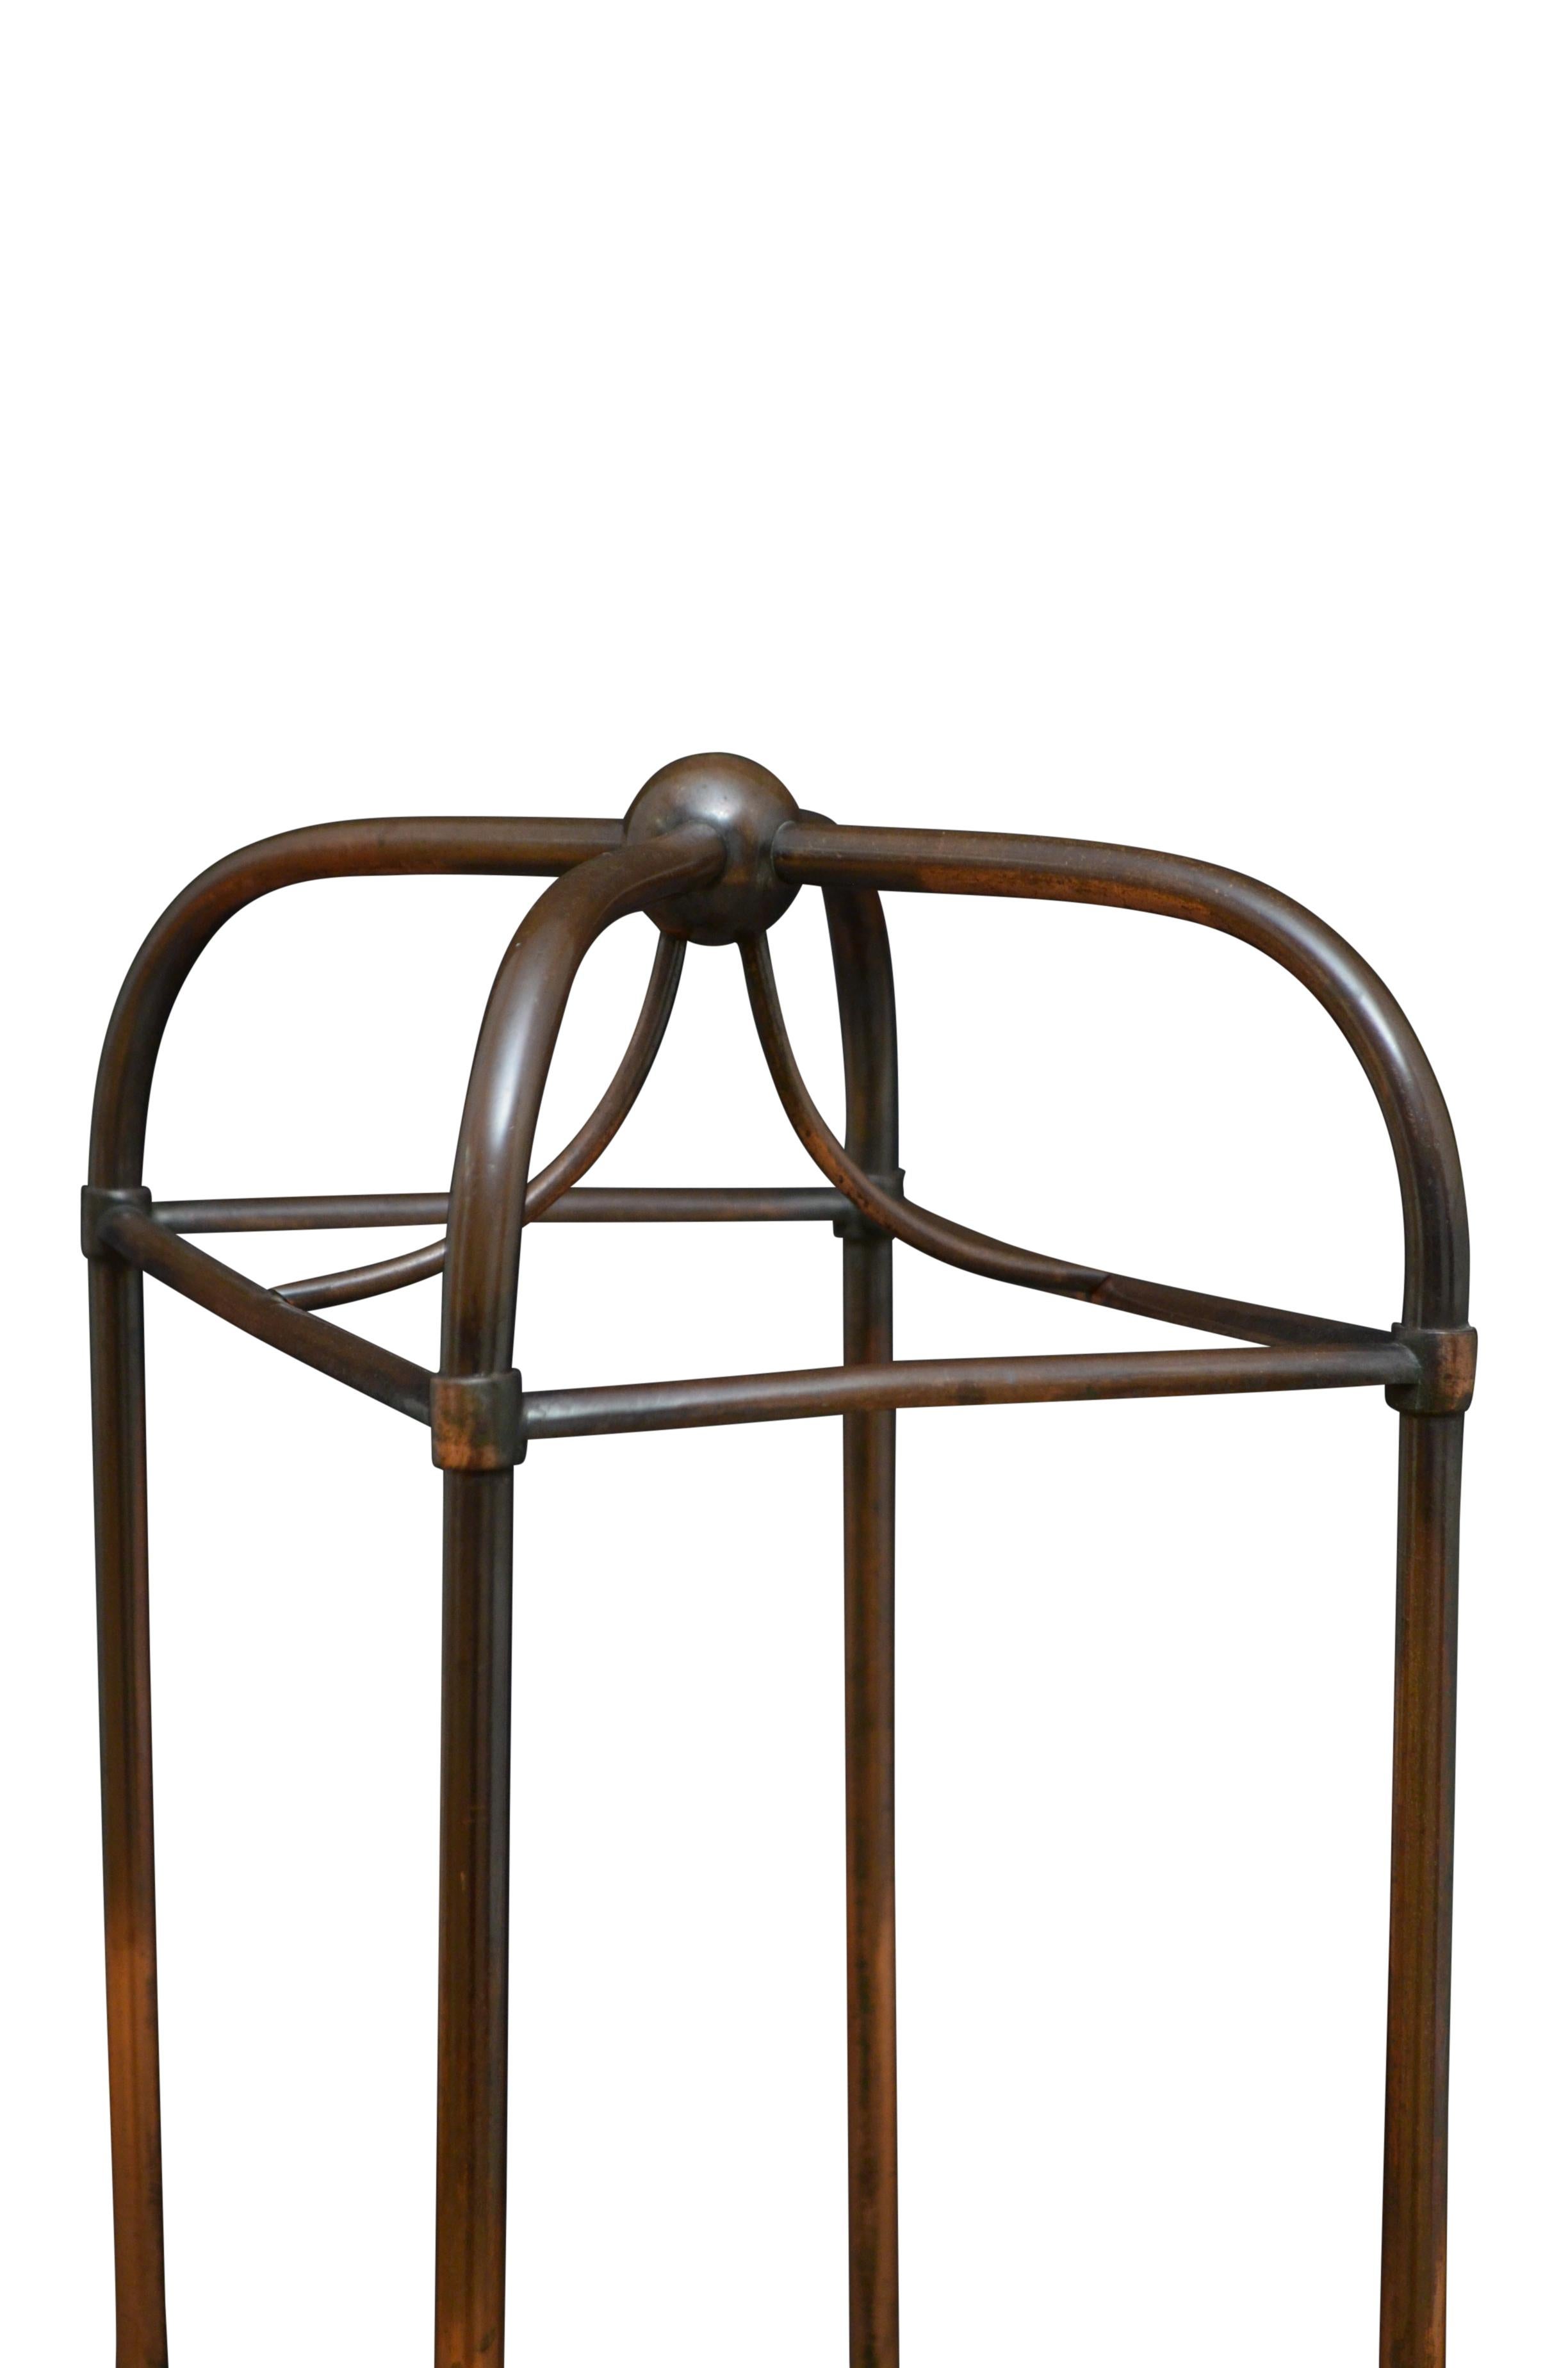 English William Tonks and Sons Umbrella Stand For Sale